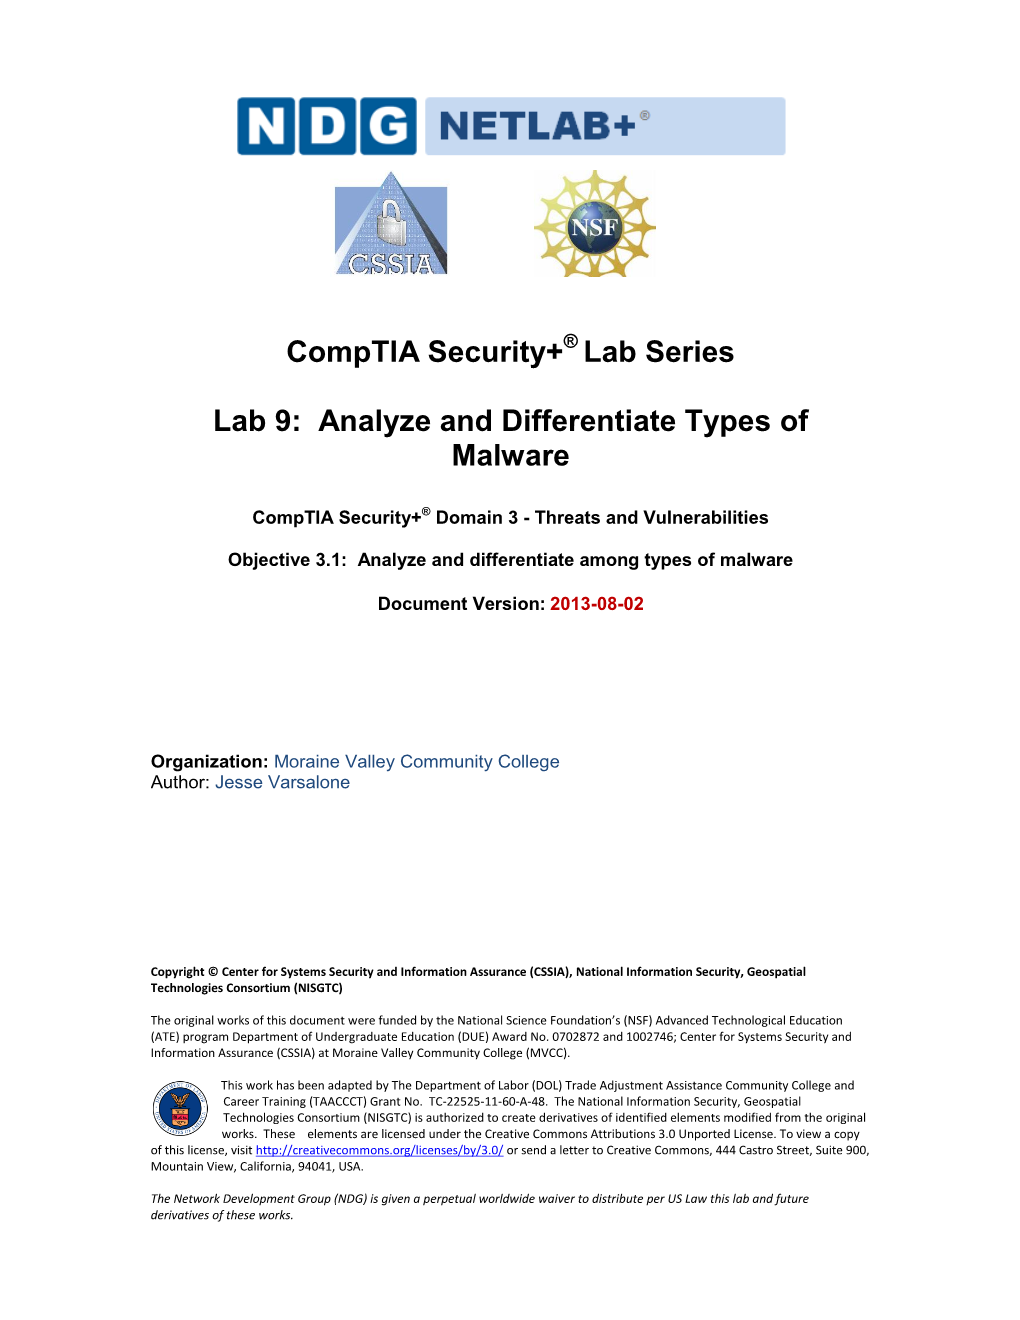 Lab 9: Analyze and Differentiate Types of Malware